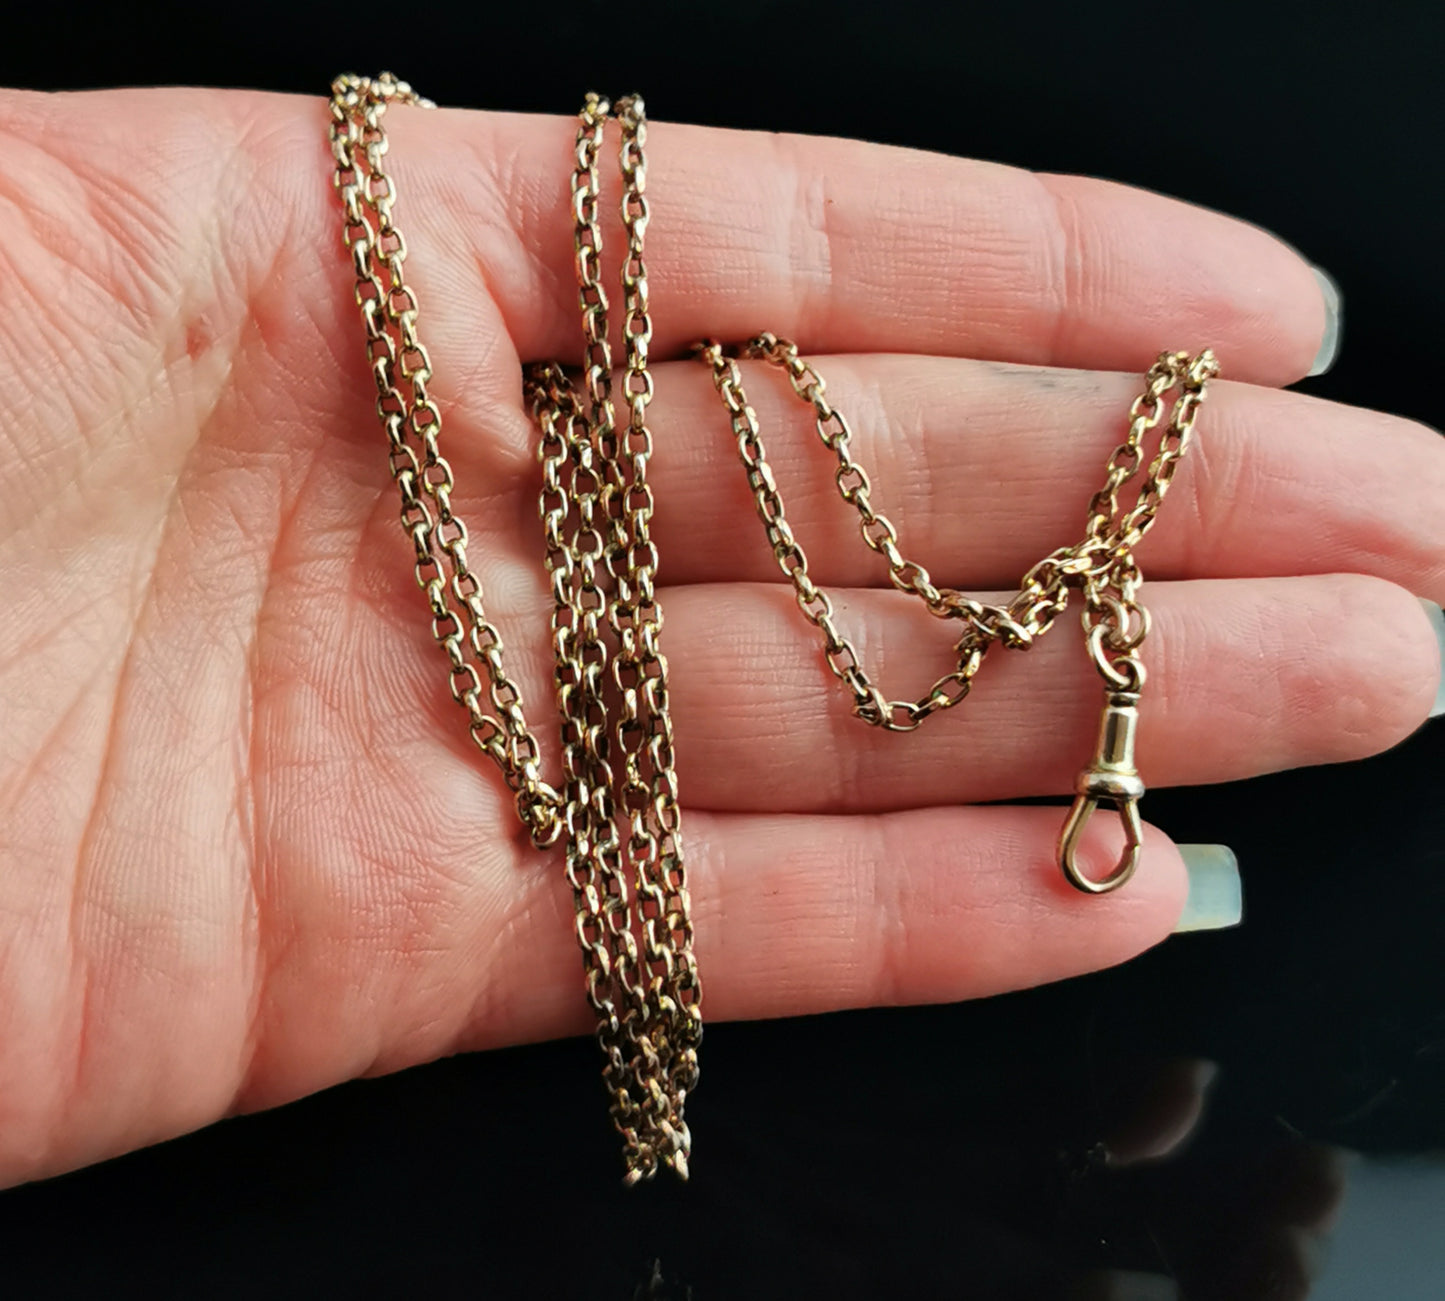 Antique Victorian 9ct gold longuard chain necklace, muff chain, belcher link